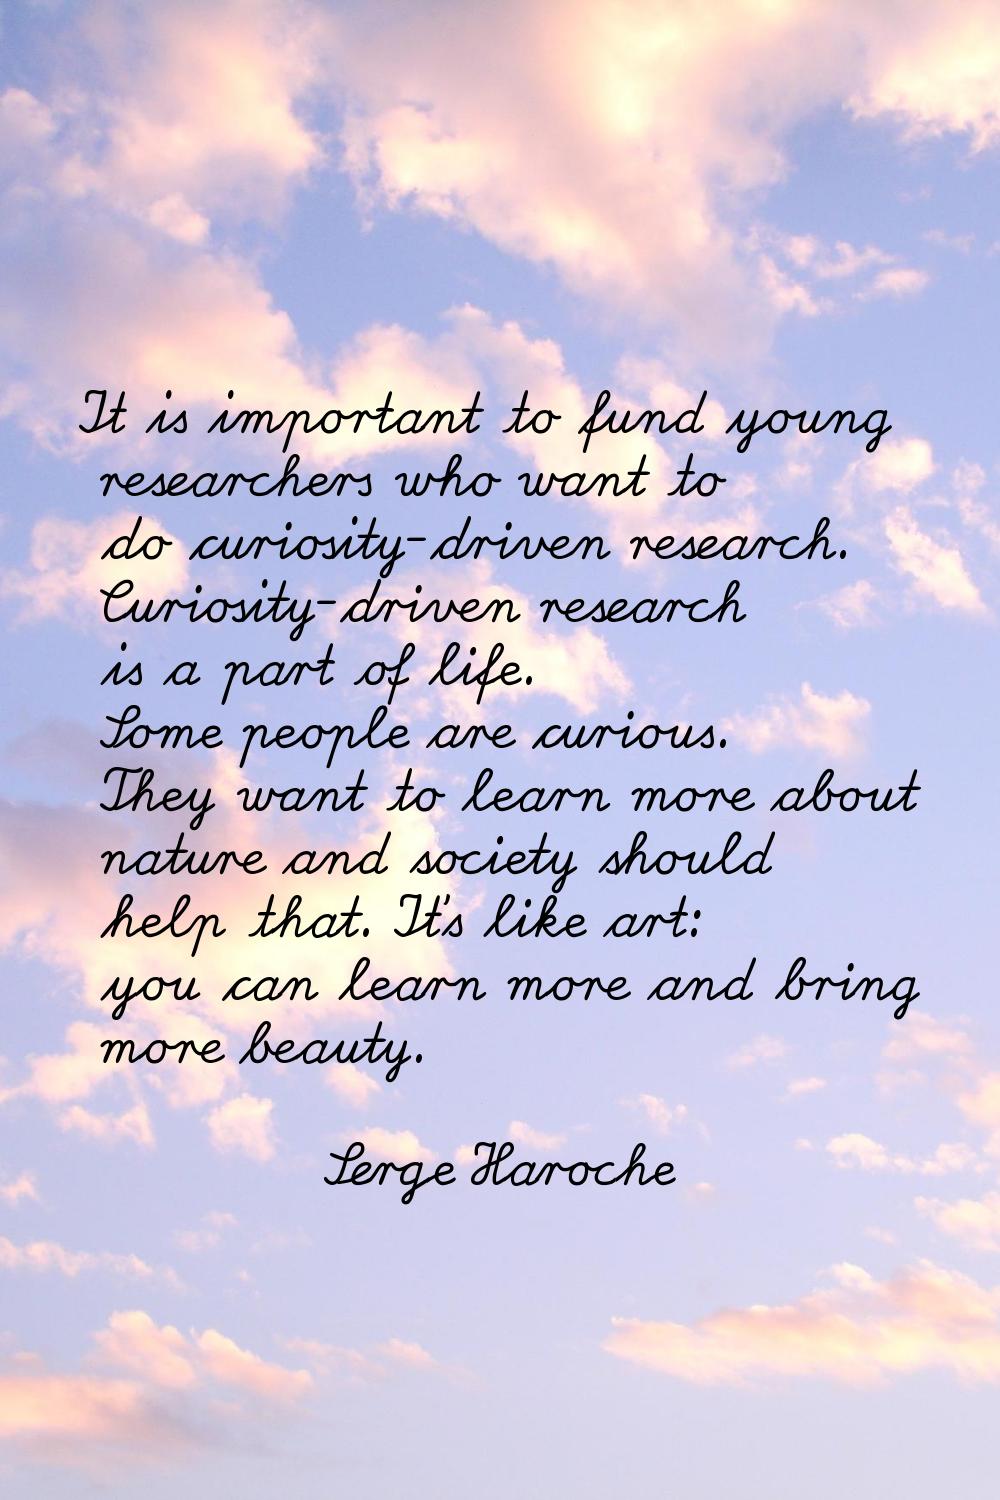 It is important to fund young researchers who want to do curiosity-driven research. Curiosity-drive